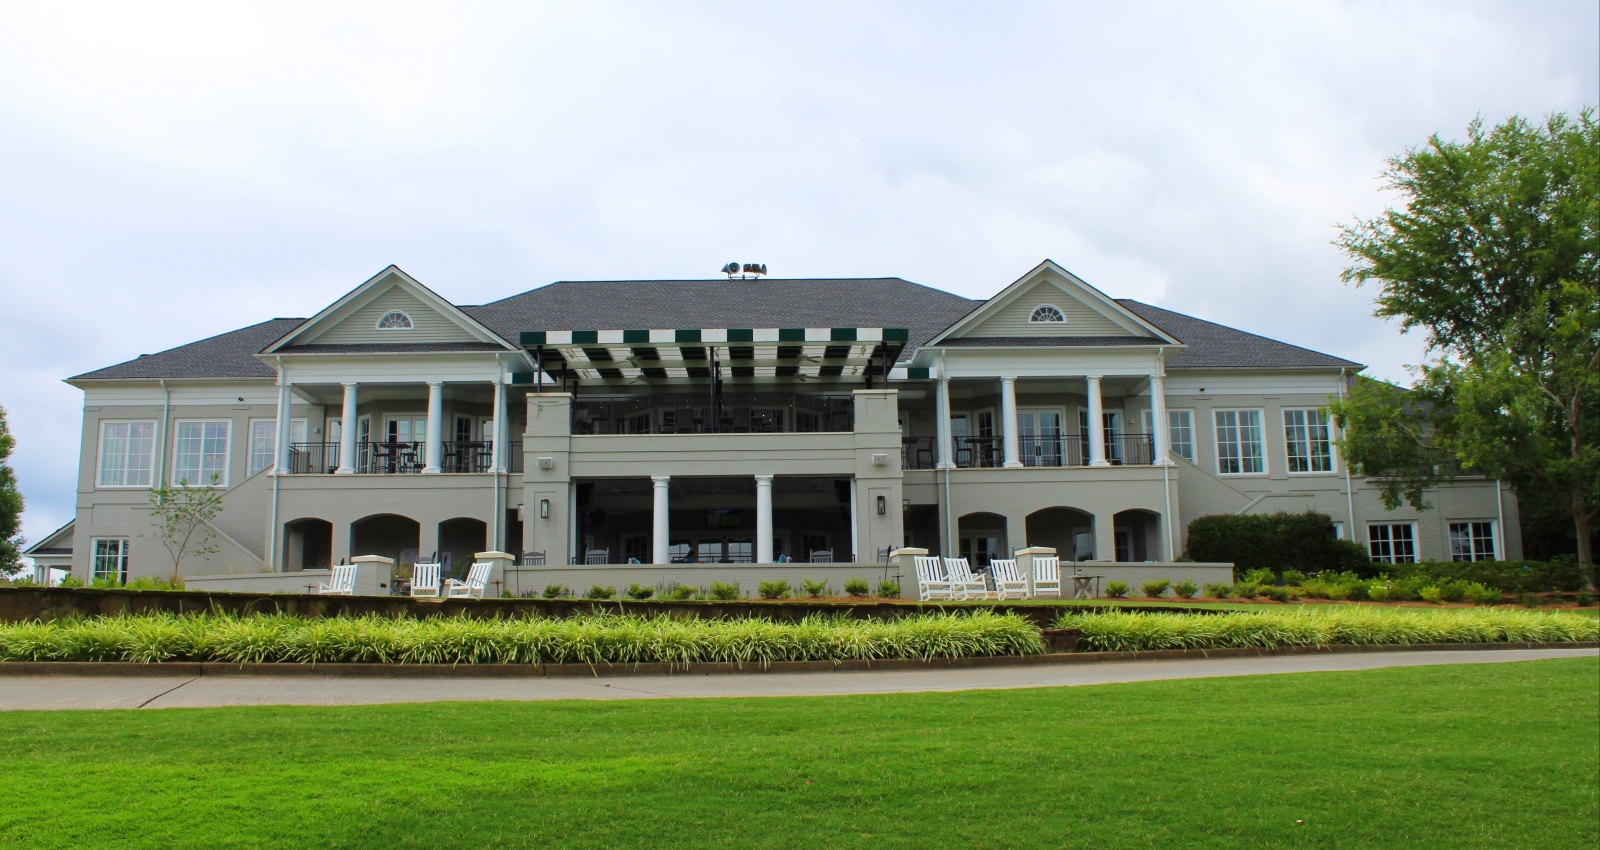 Athens Country Club